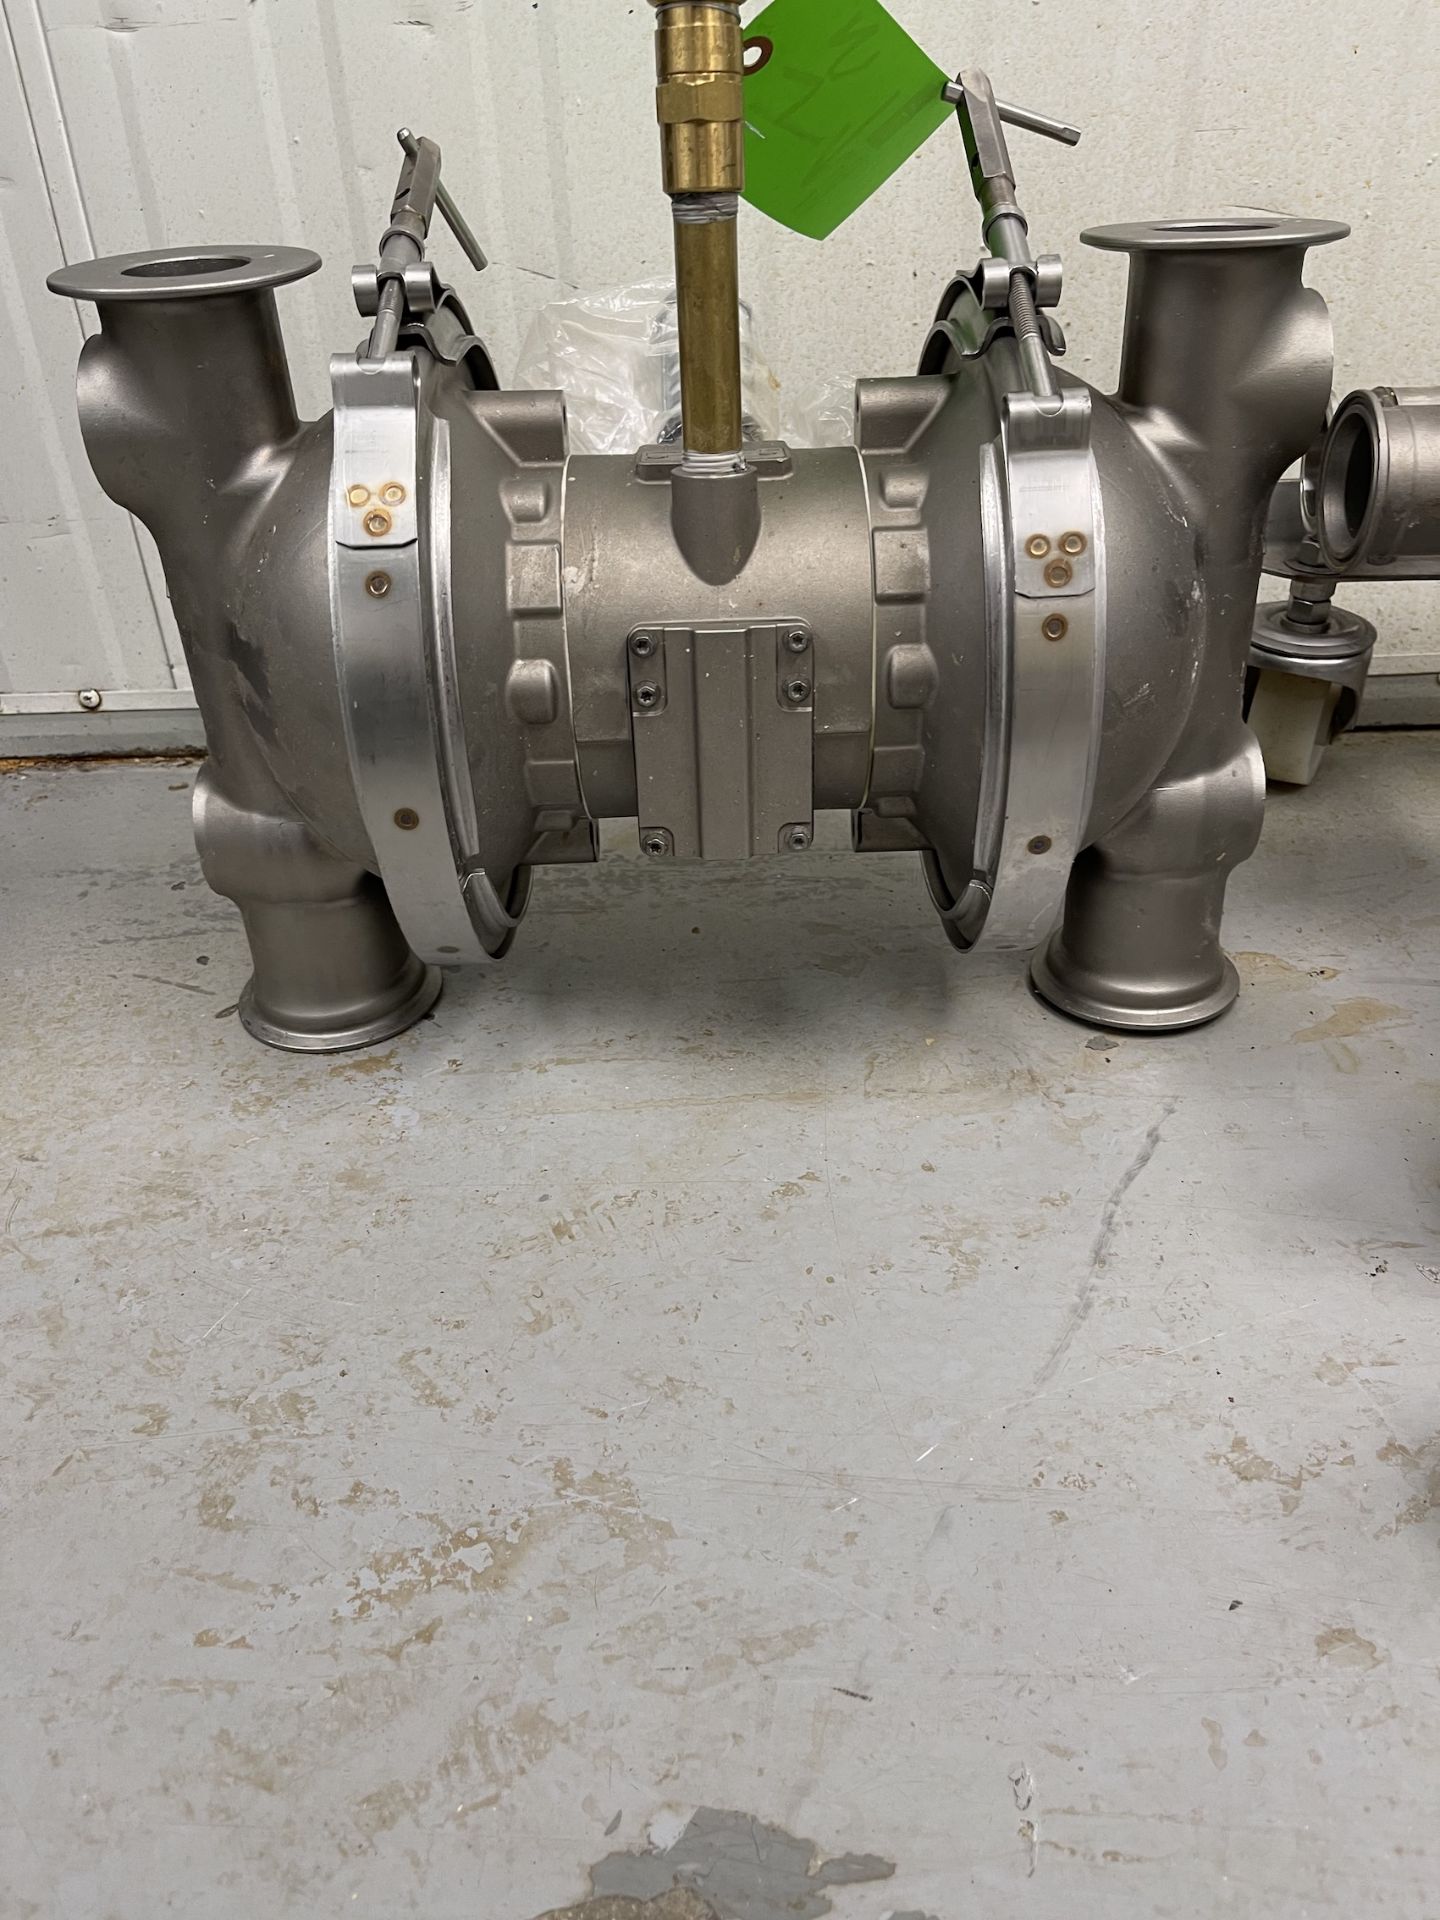 GRACO SANIFORCE 1650 S/S DIAPHRAGM PUMP, MODEL 05H15A, 100-378 GPM, 3120-8.2 MAX FLUID AND AIR PSI - Image 5 of 12